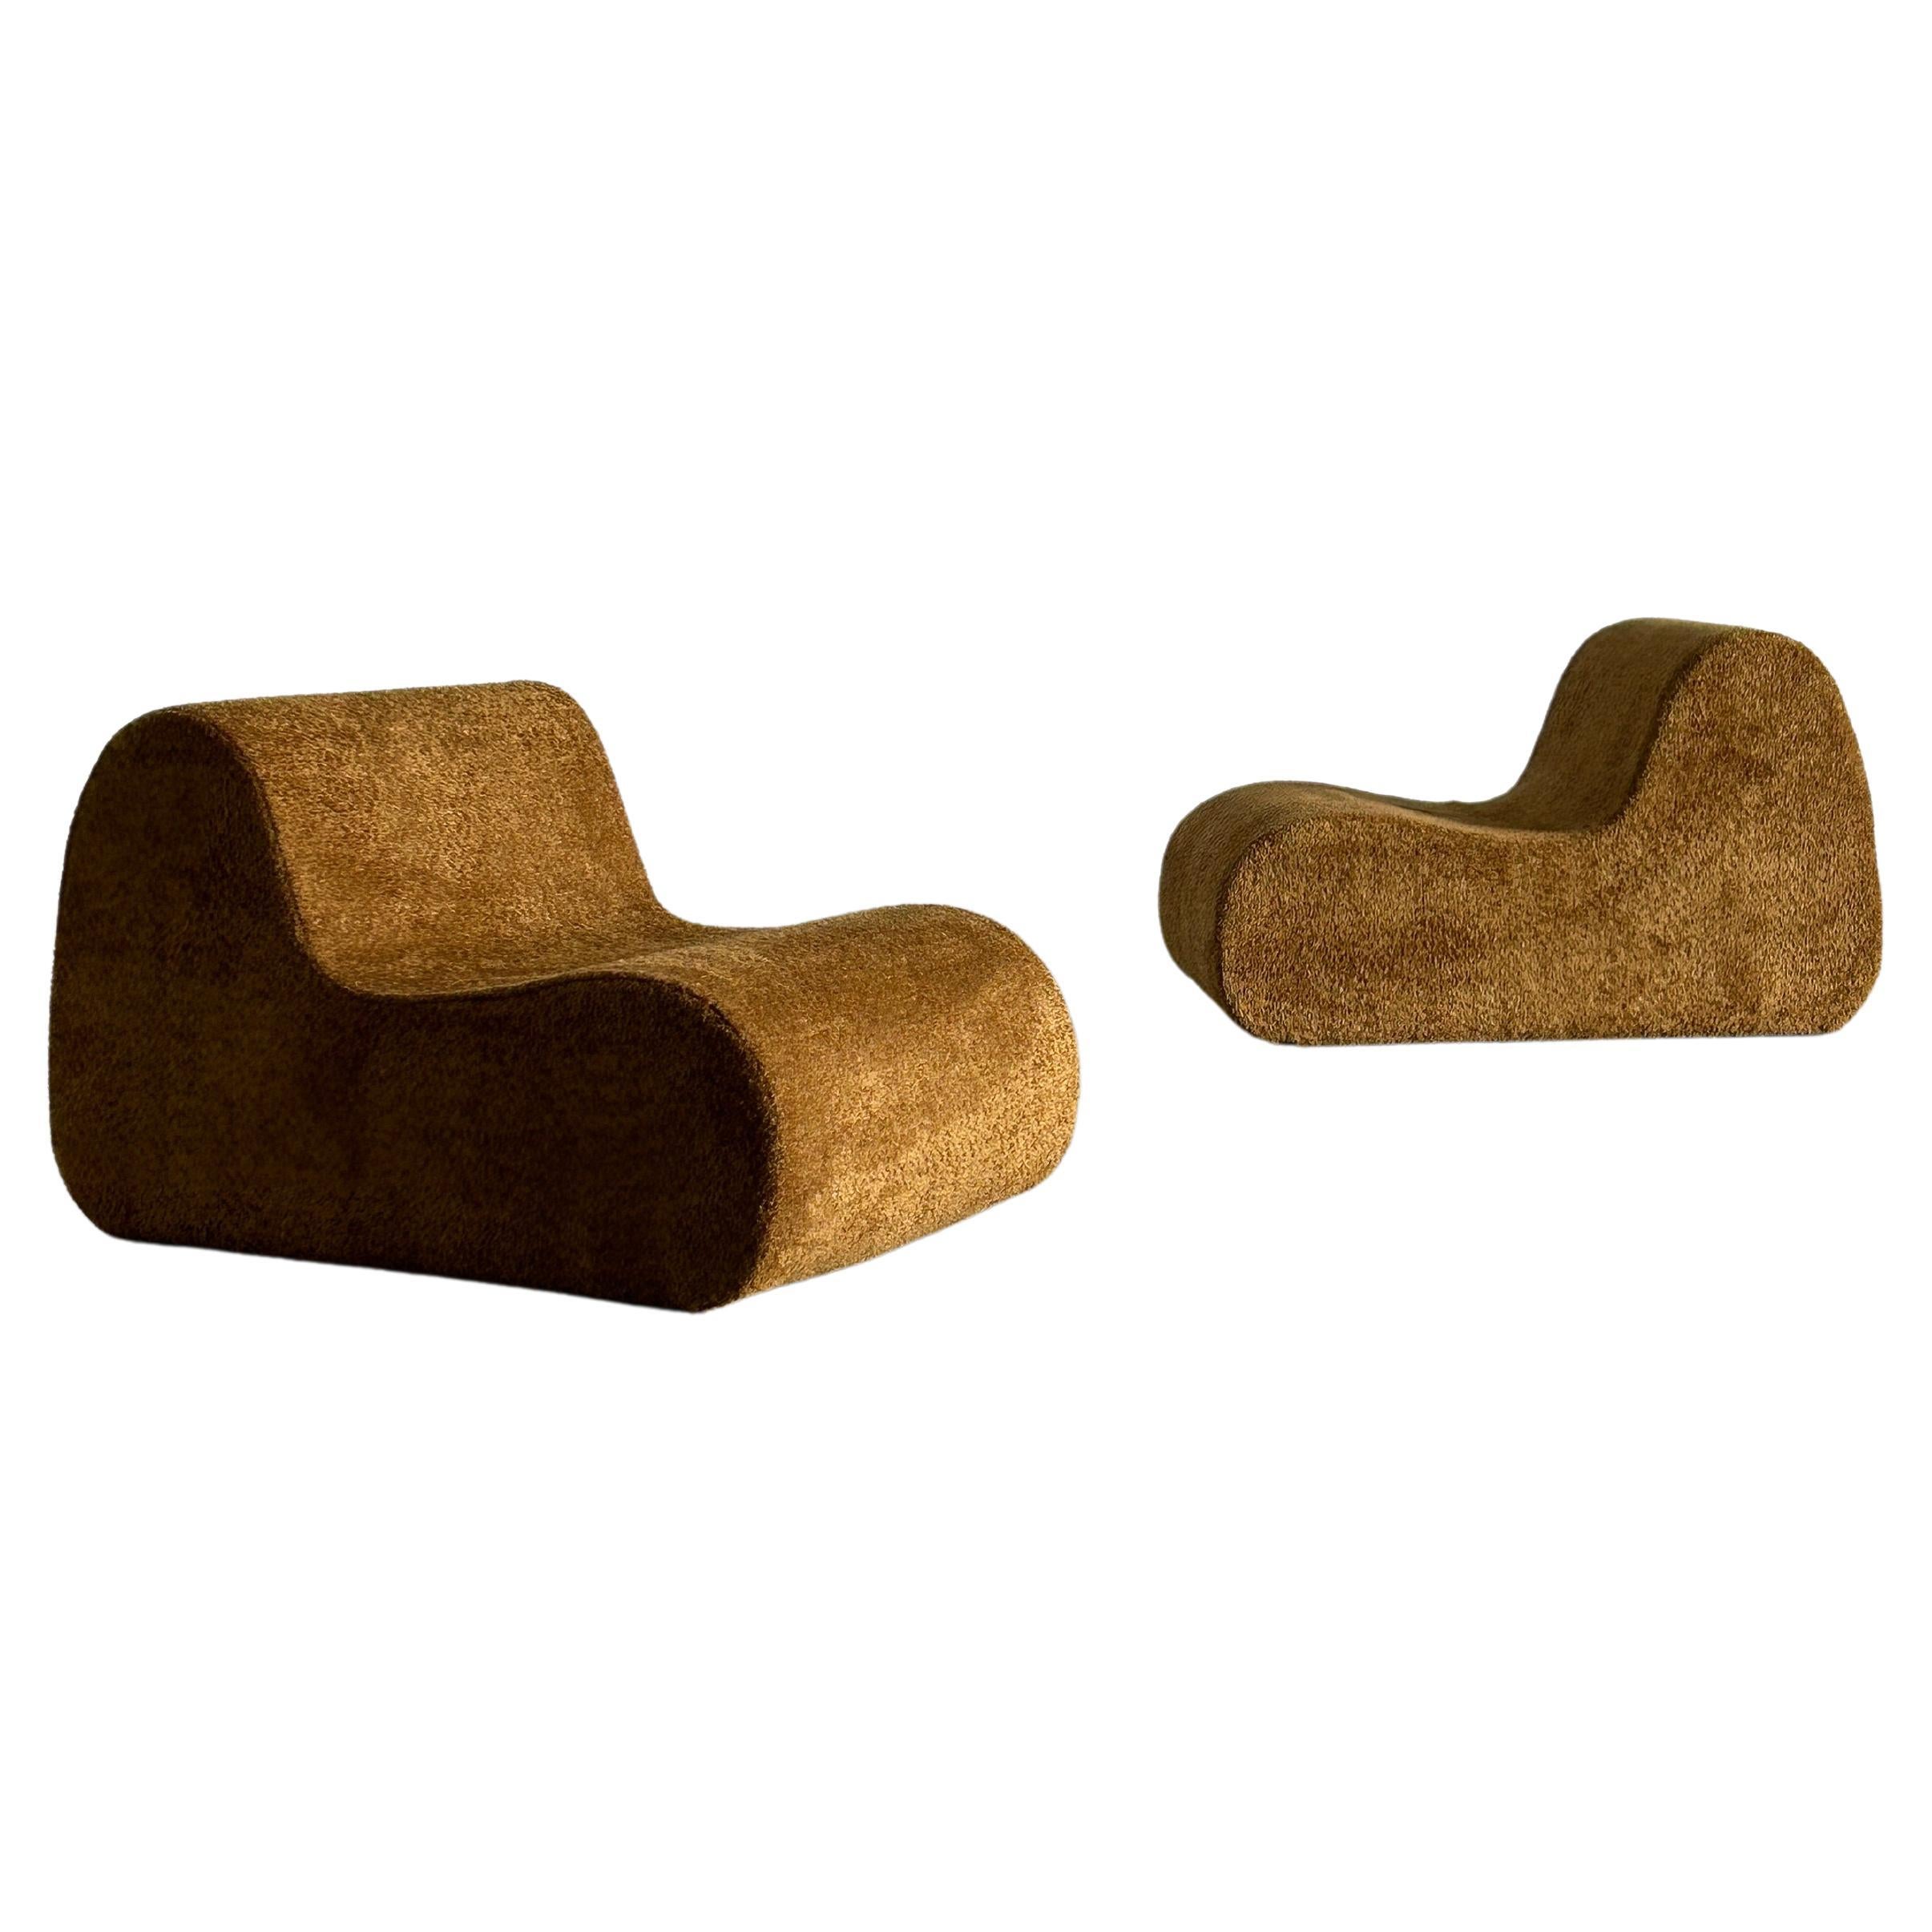 Vintage Italian Mid-Century-Modern Lounge Chair in Ochre Boucle, 1970s Italy For Sale